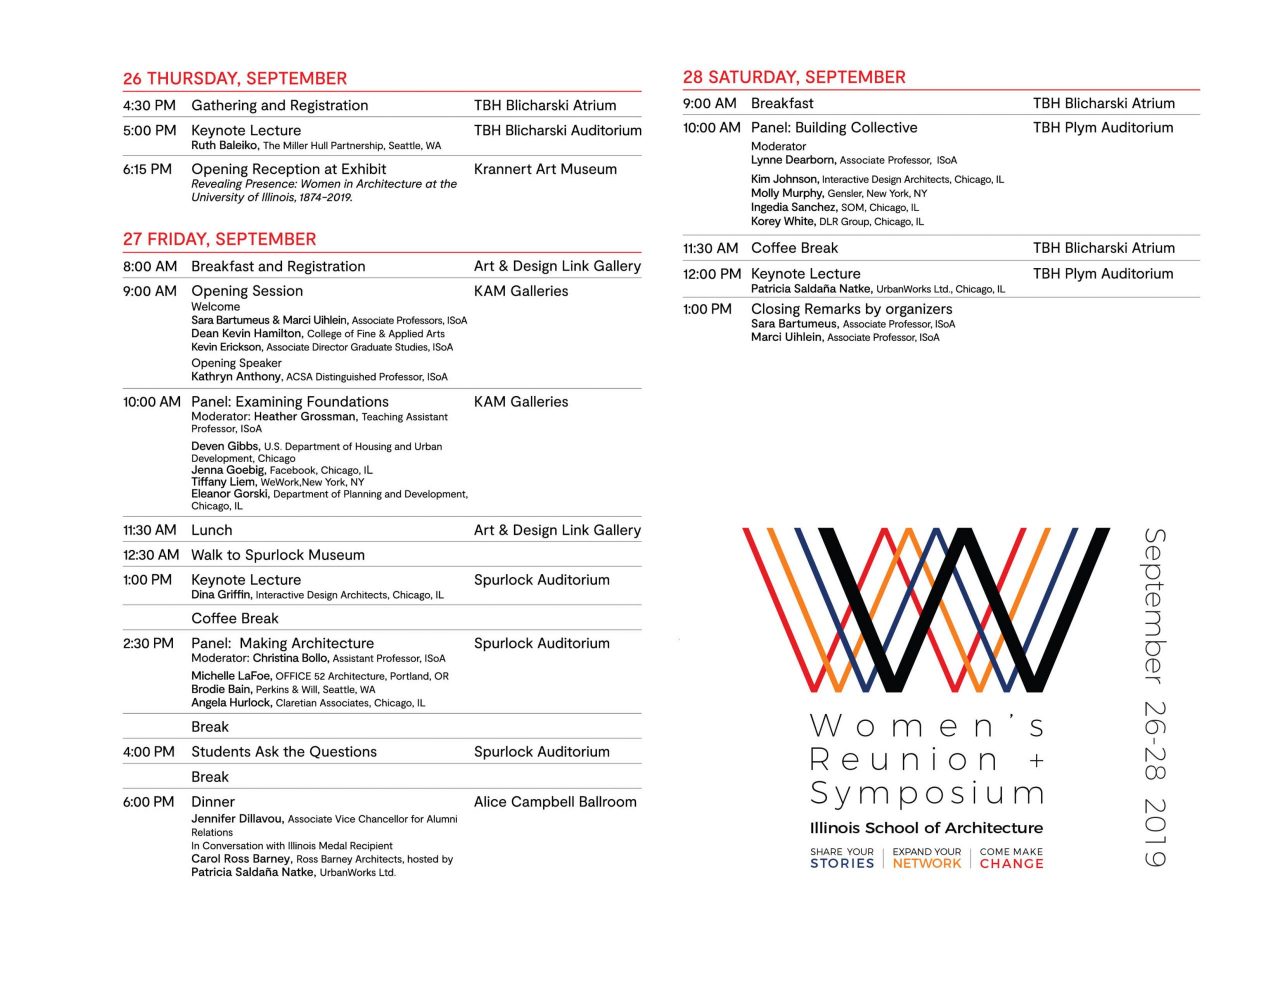 image of the speaker schedule for the symposium 